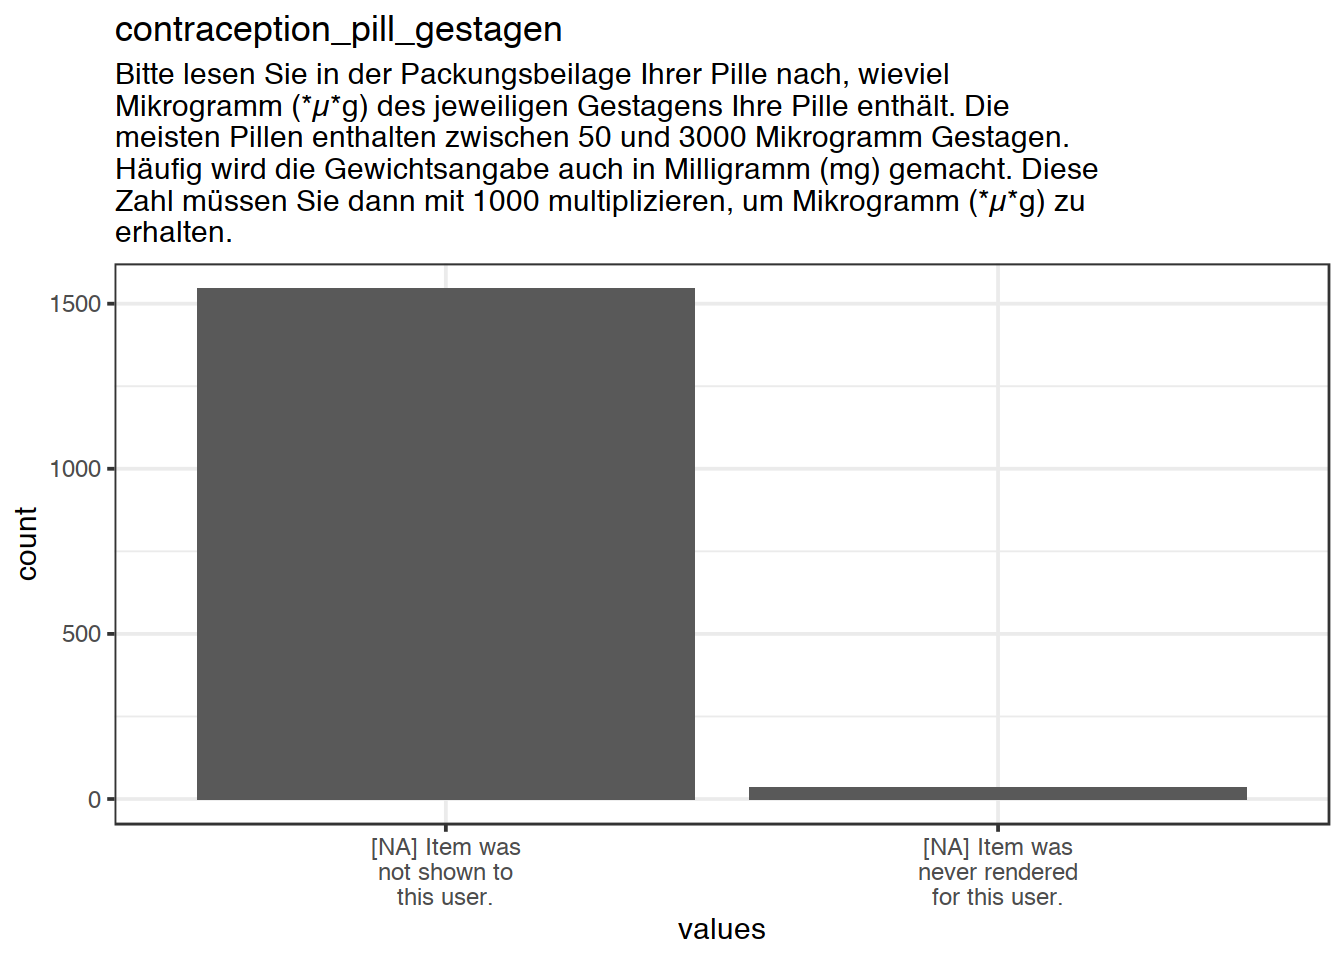 Plot of missing values for contraception_pill_gestagen